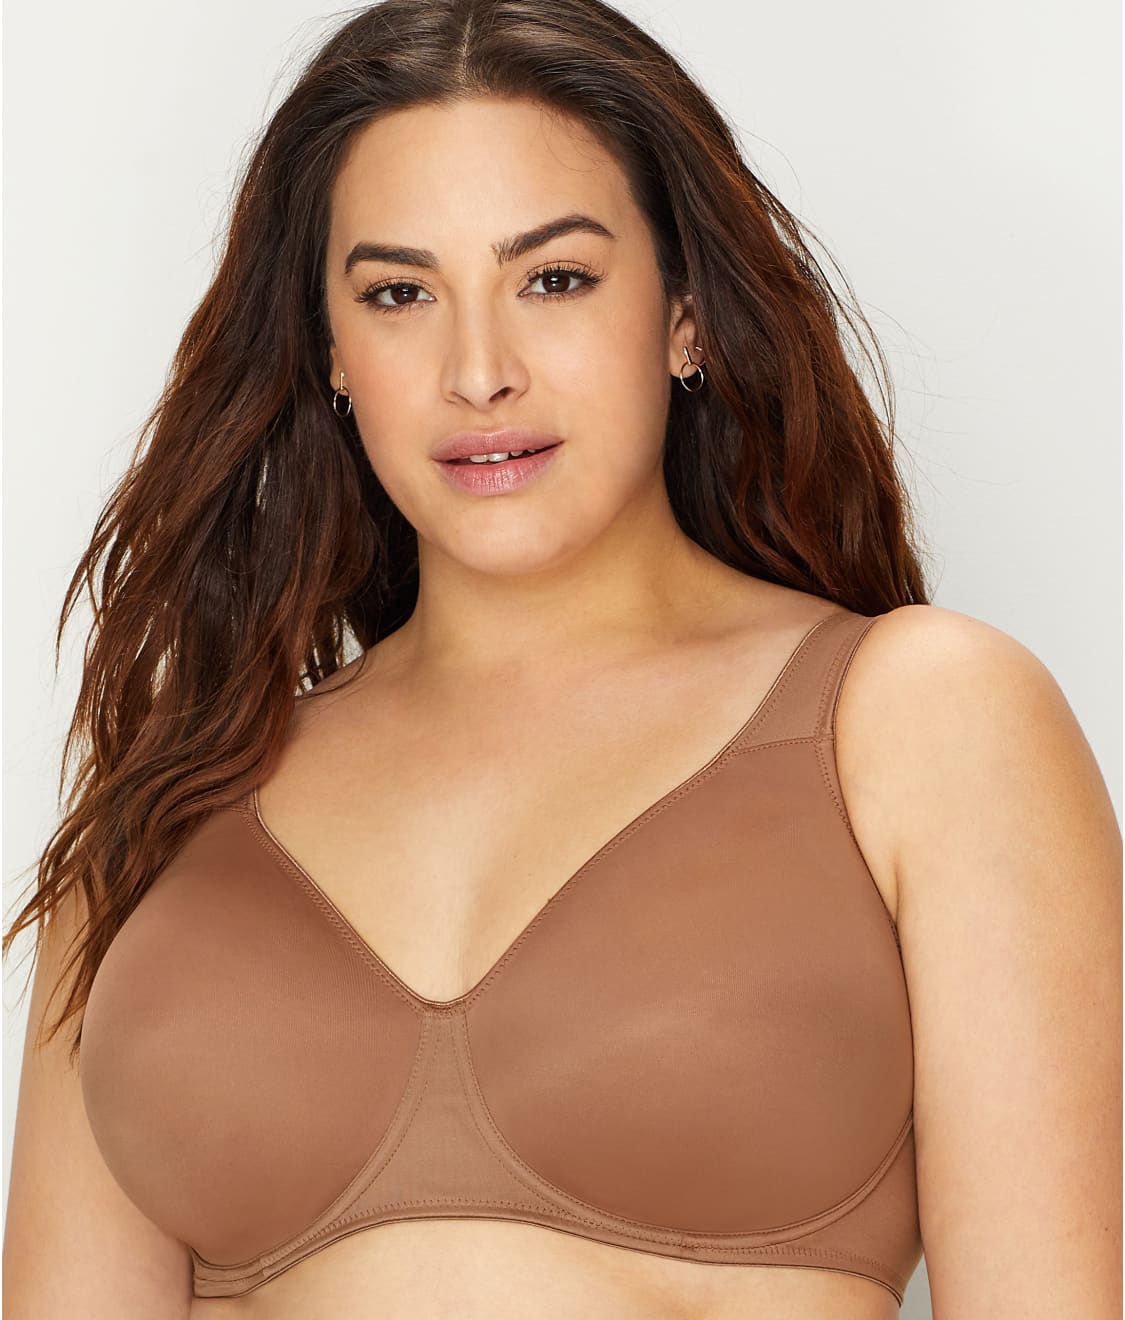 Skin Rosa Faia By Anita Twin Bra T Shirt Full Cup 5490 Underwired Moulded